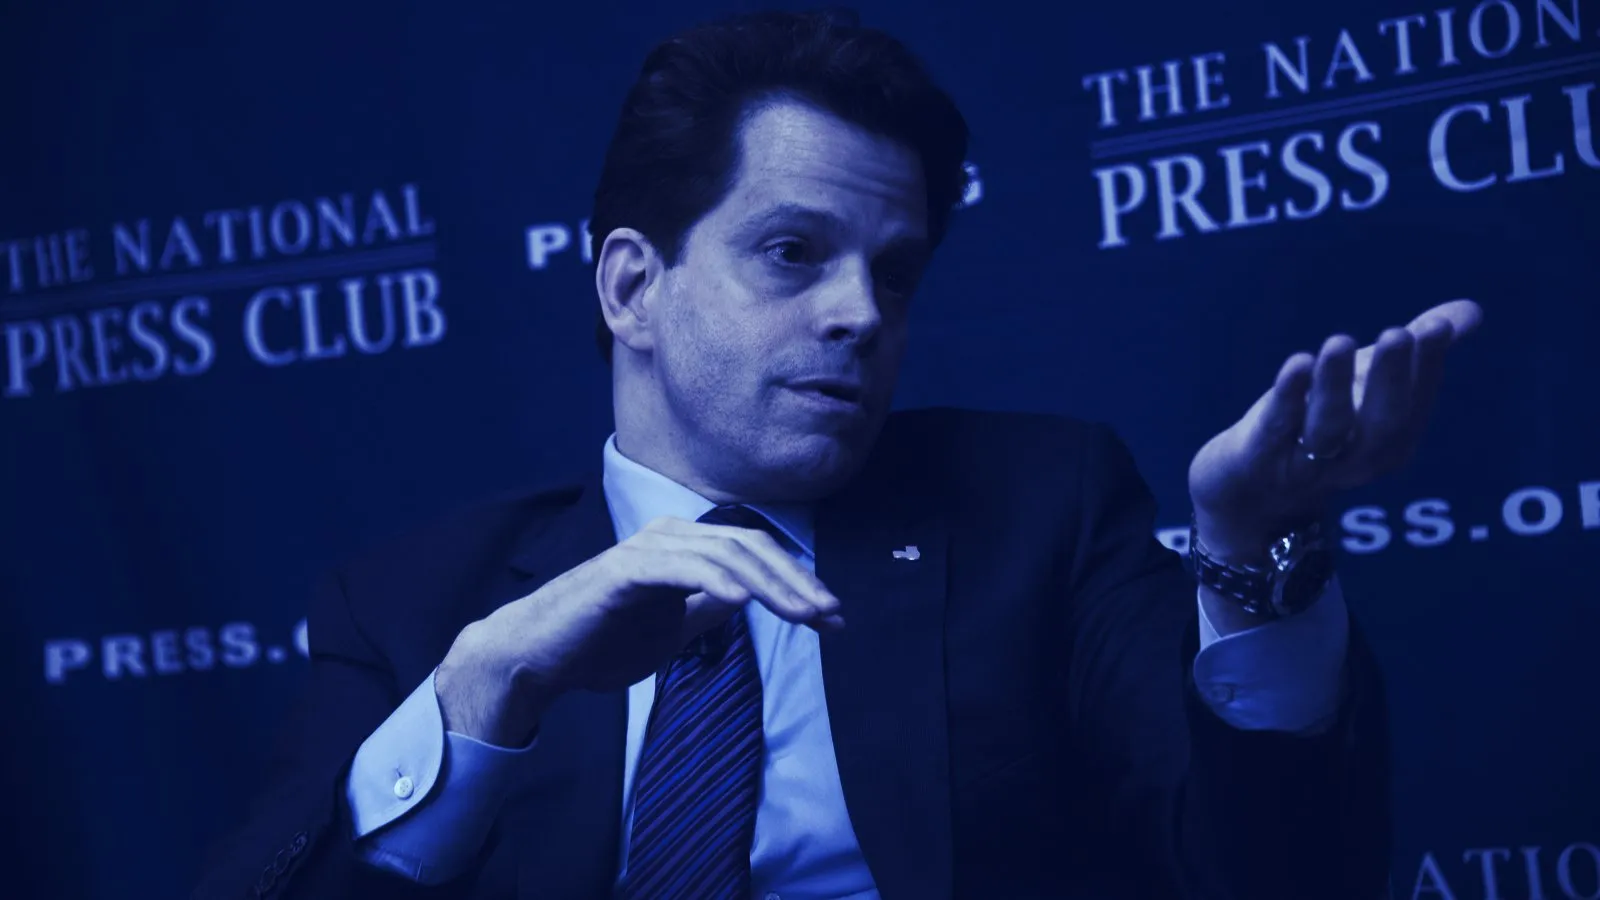 Anthony Scaramucci, former White House Communications Director. Image: Shutterstock